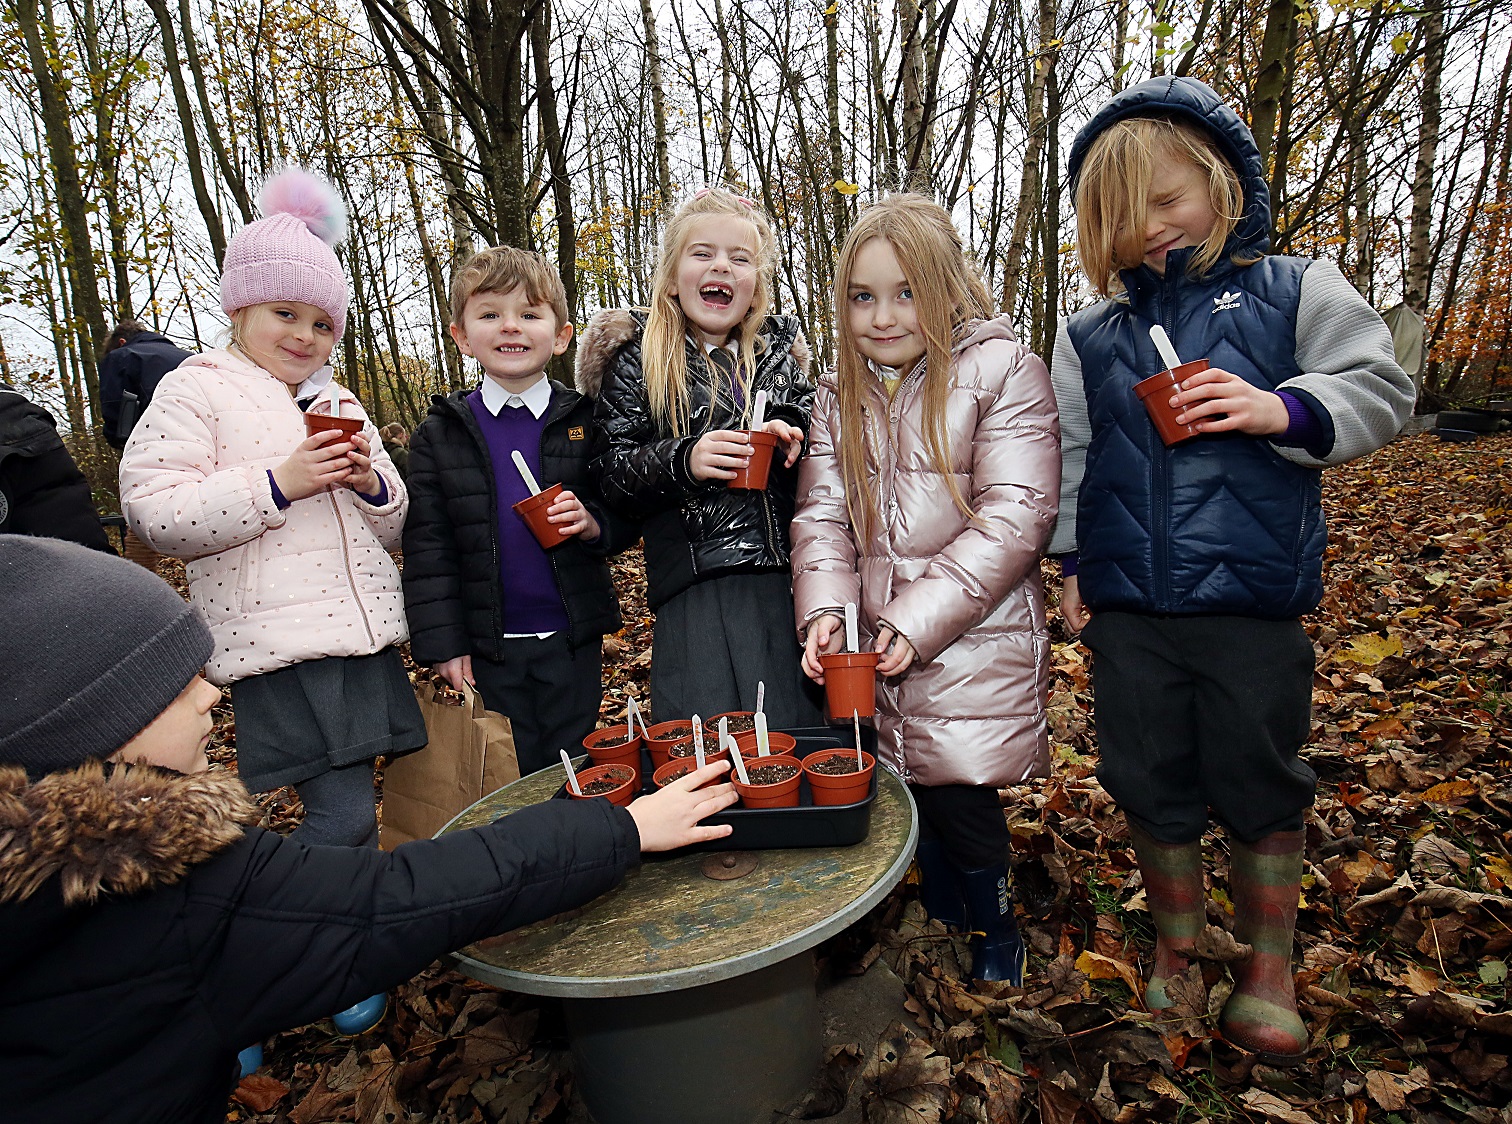 Primary pupils are planting for the future